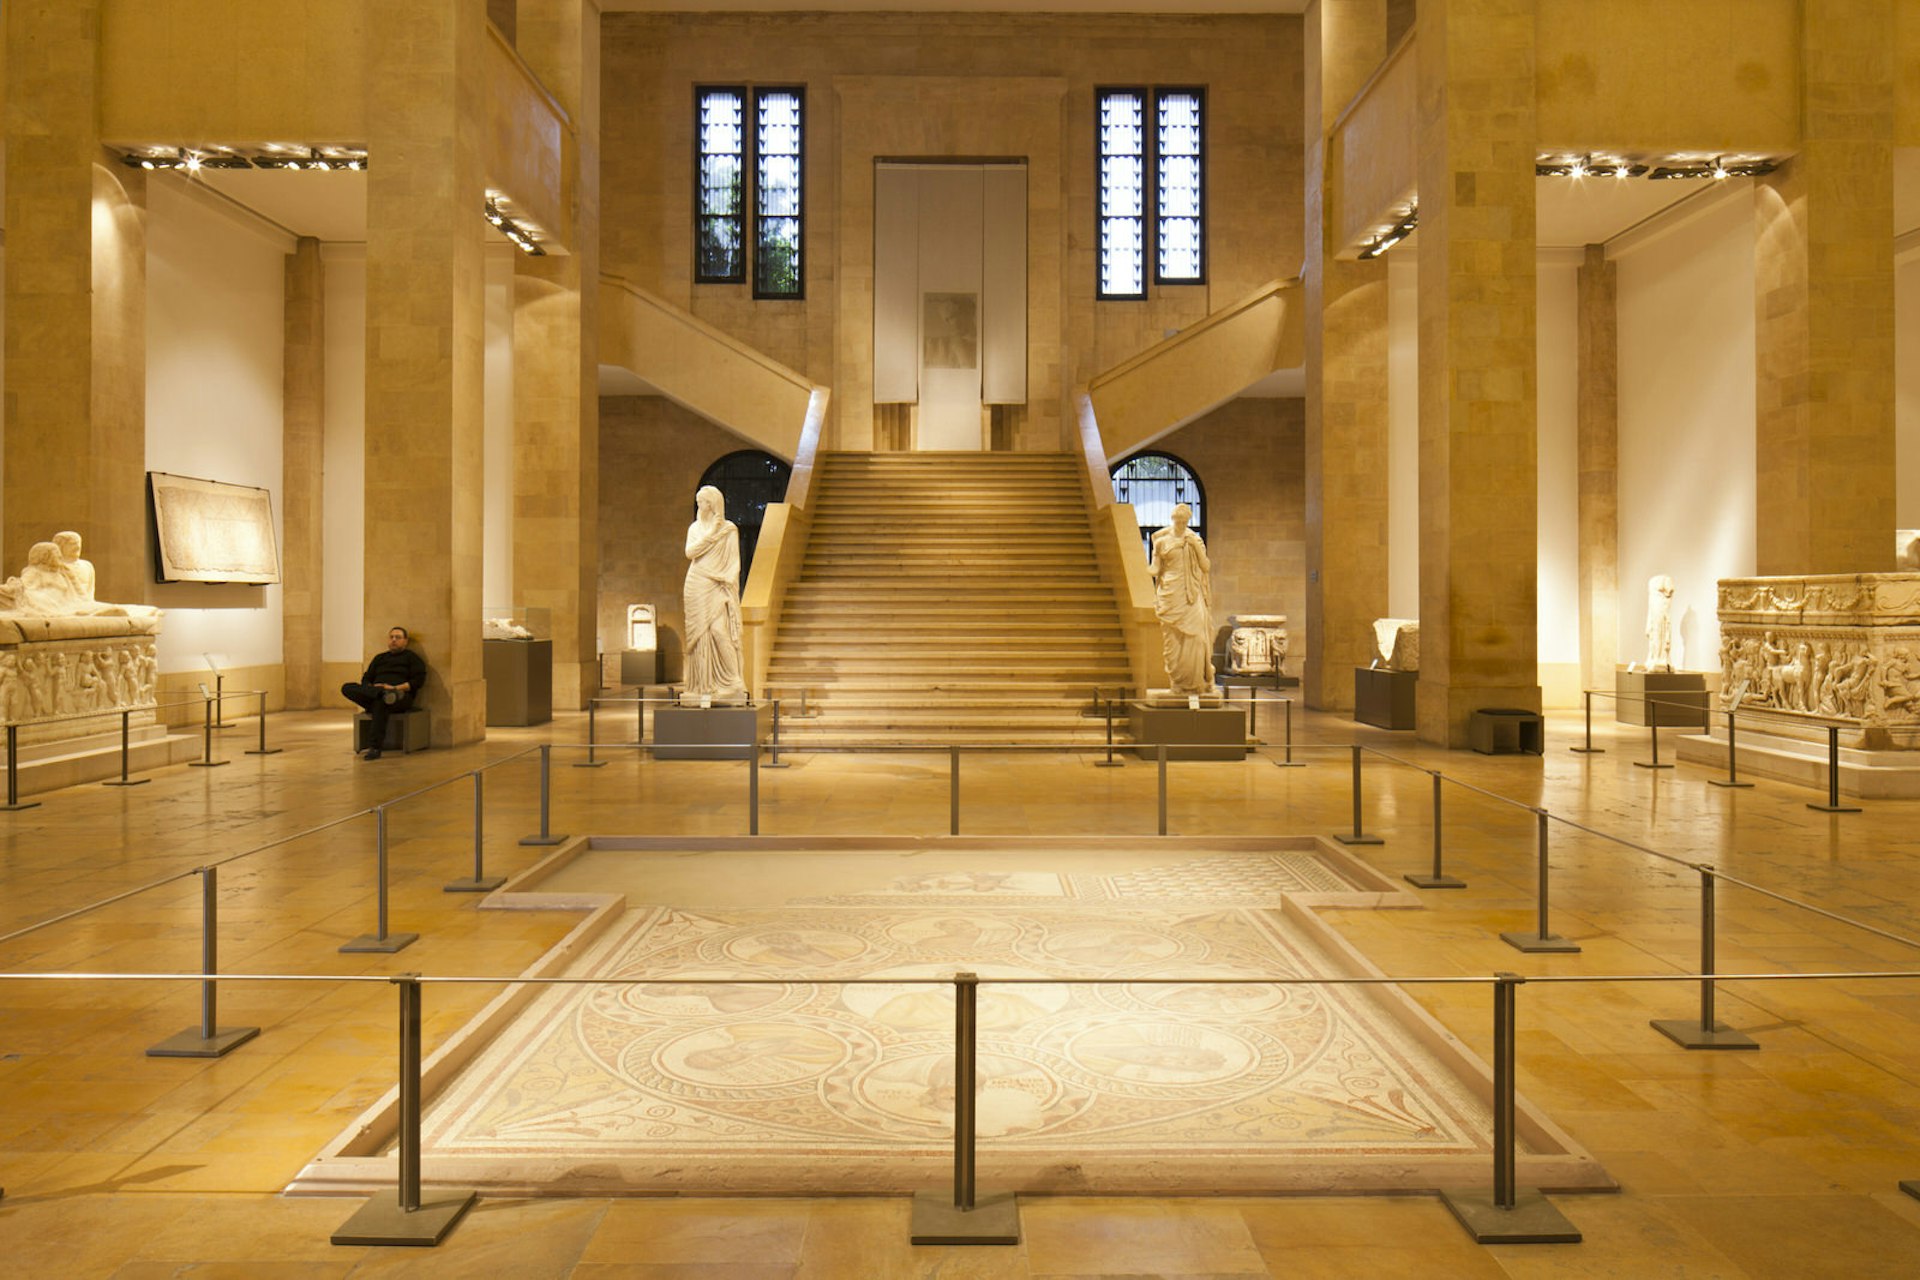 The National Museum in Beirut, Lebanon. Image by Nick Ledger / Getty Images